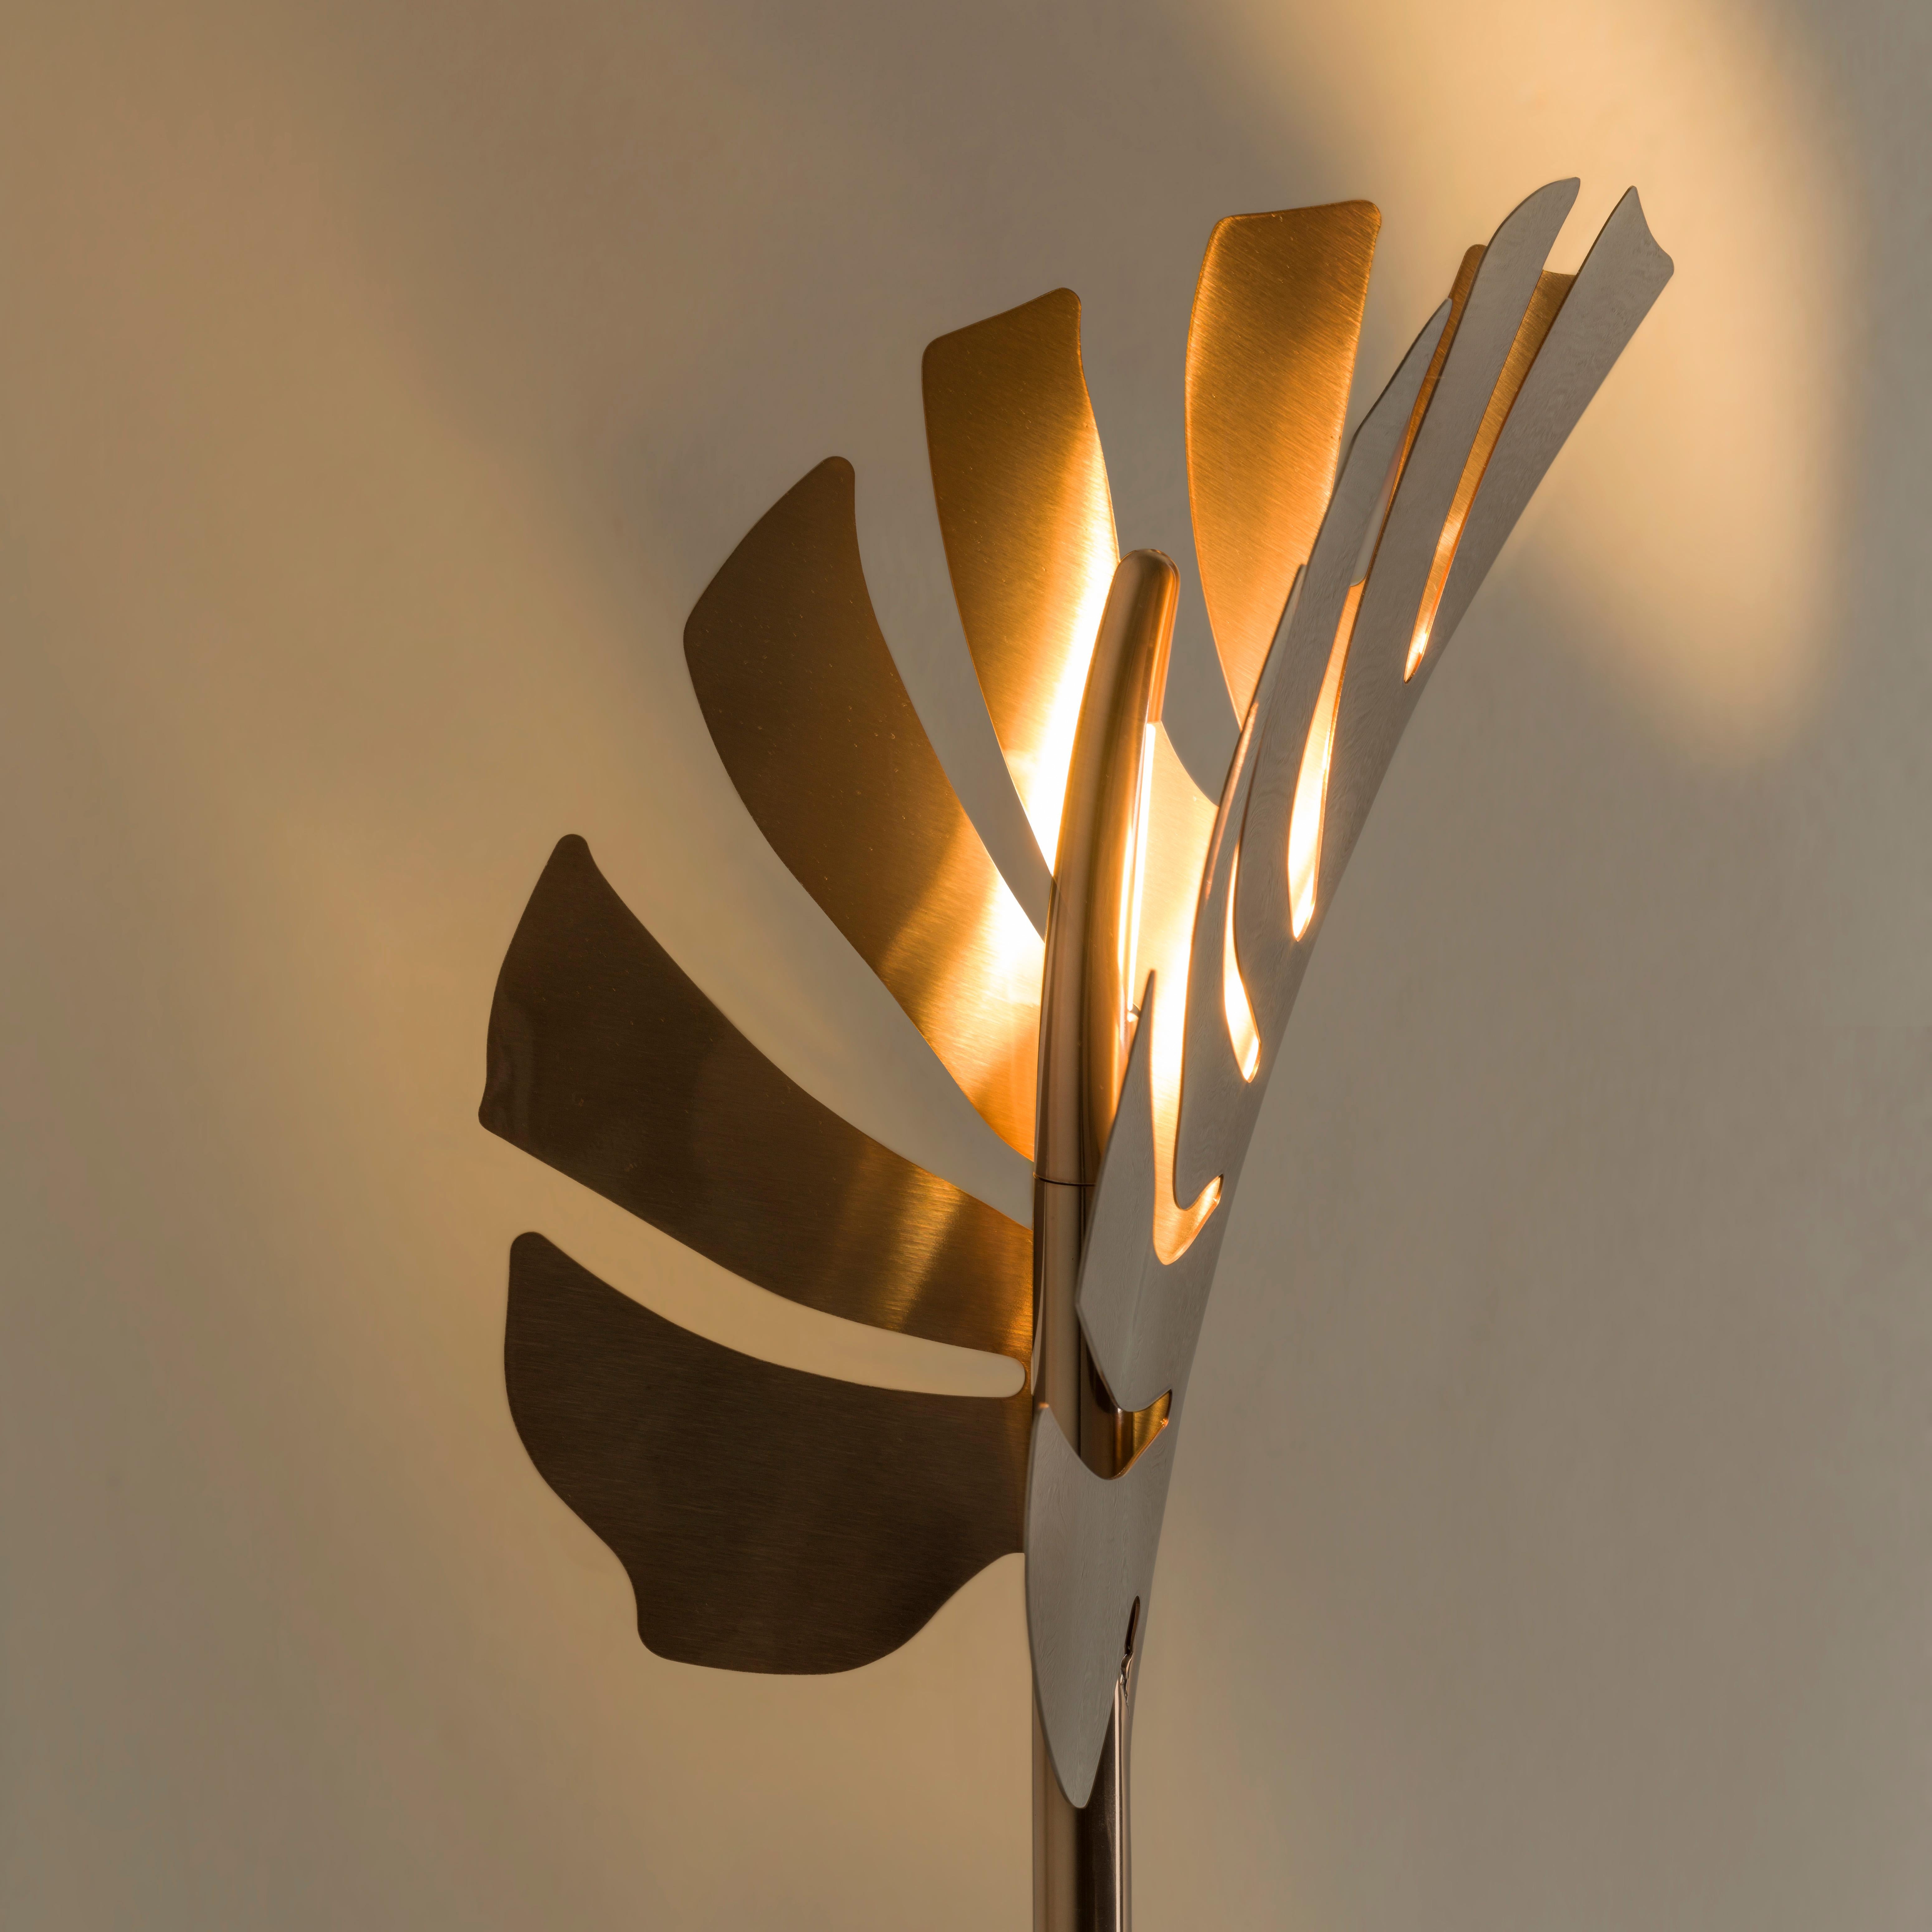 Metallic leaves supported by marble elements, they contain luminous pistils that reflect their shape on the walls.